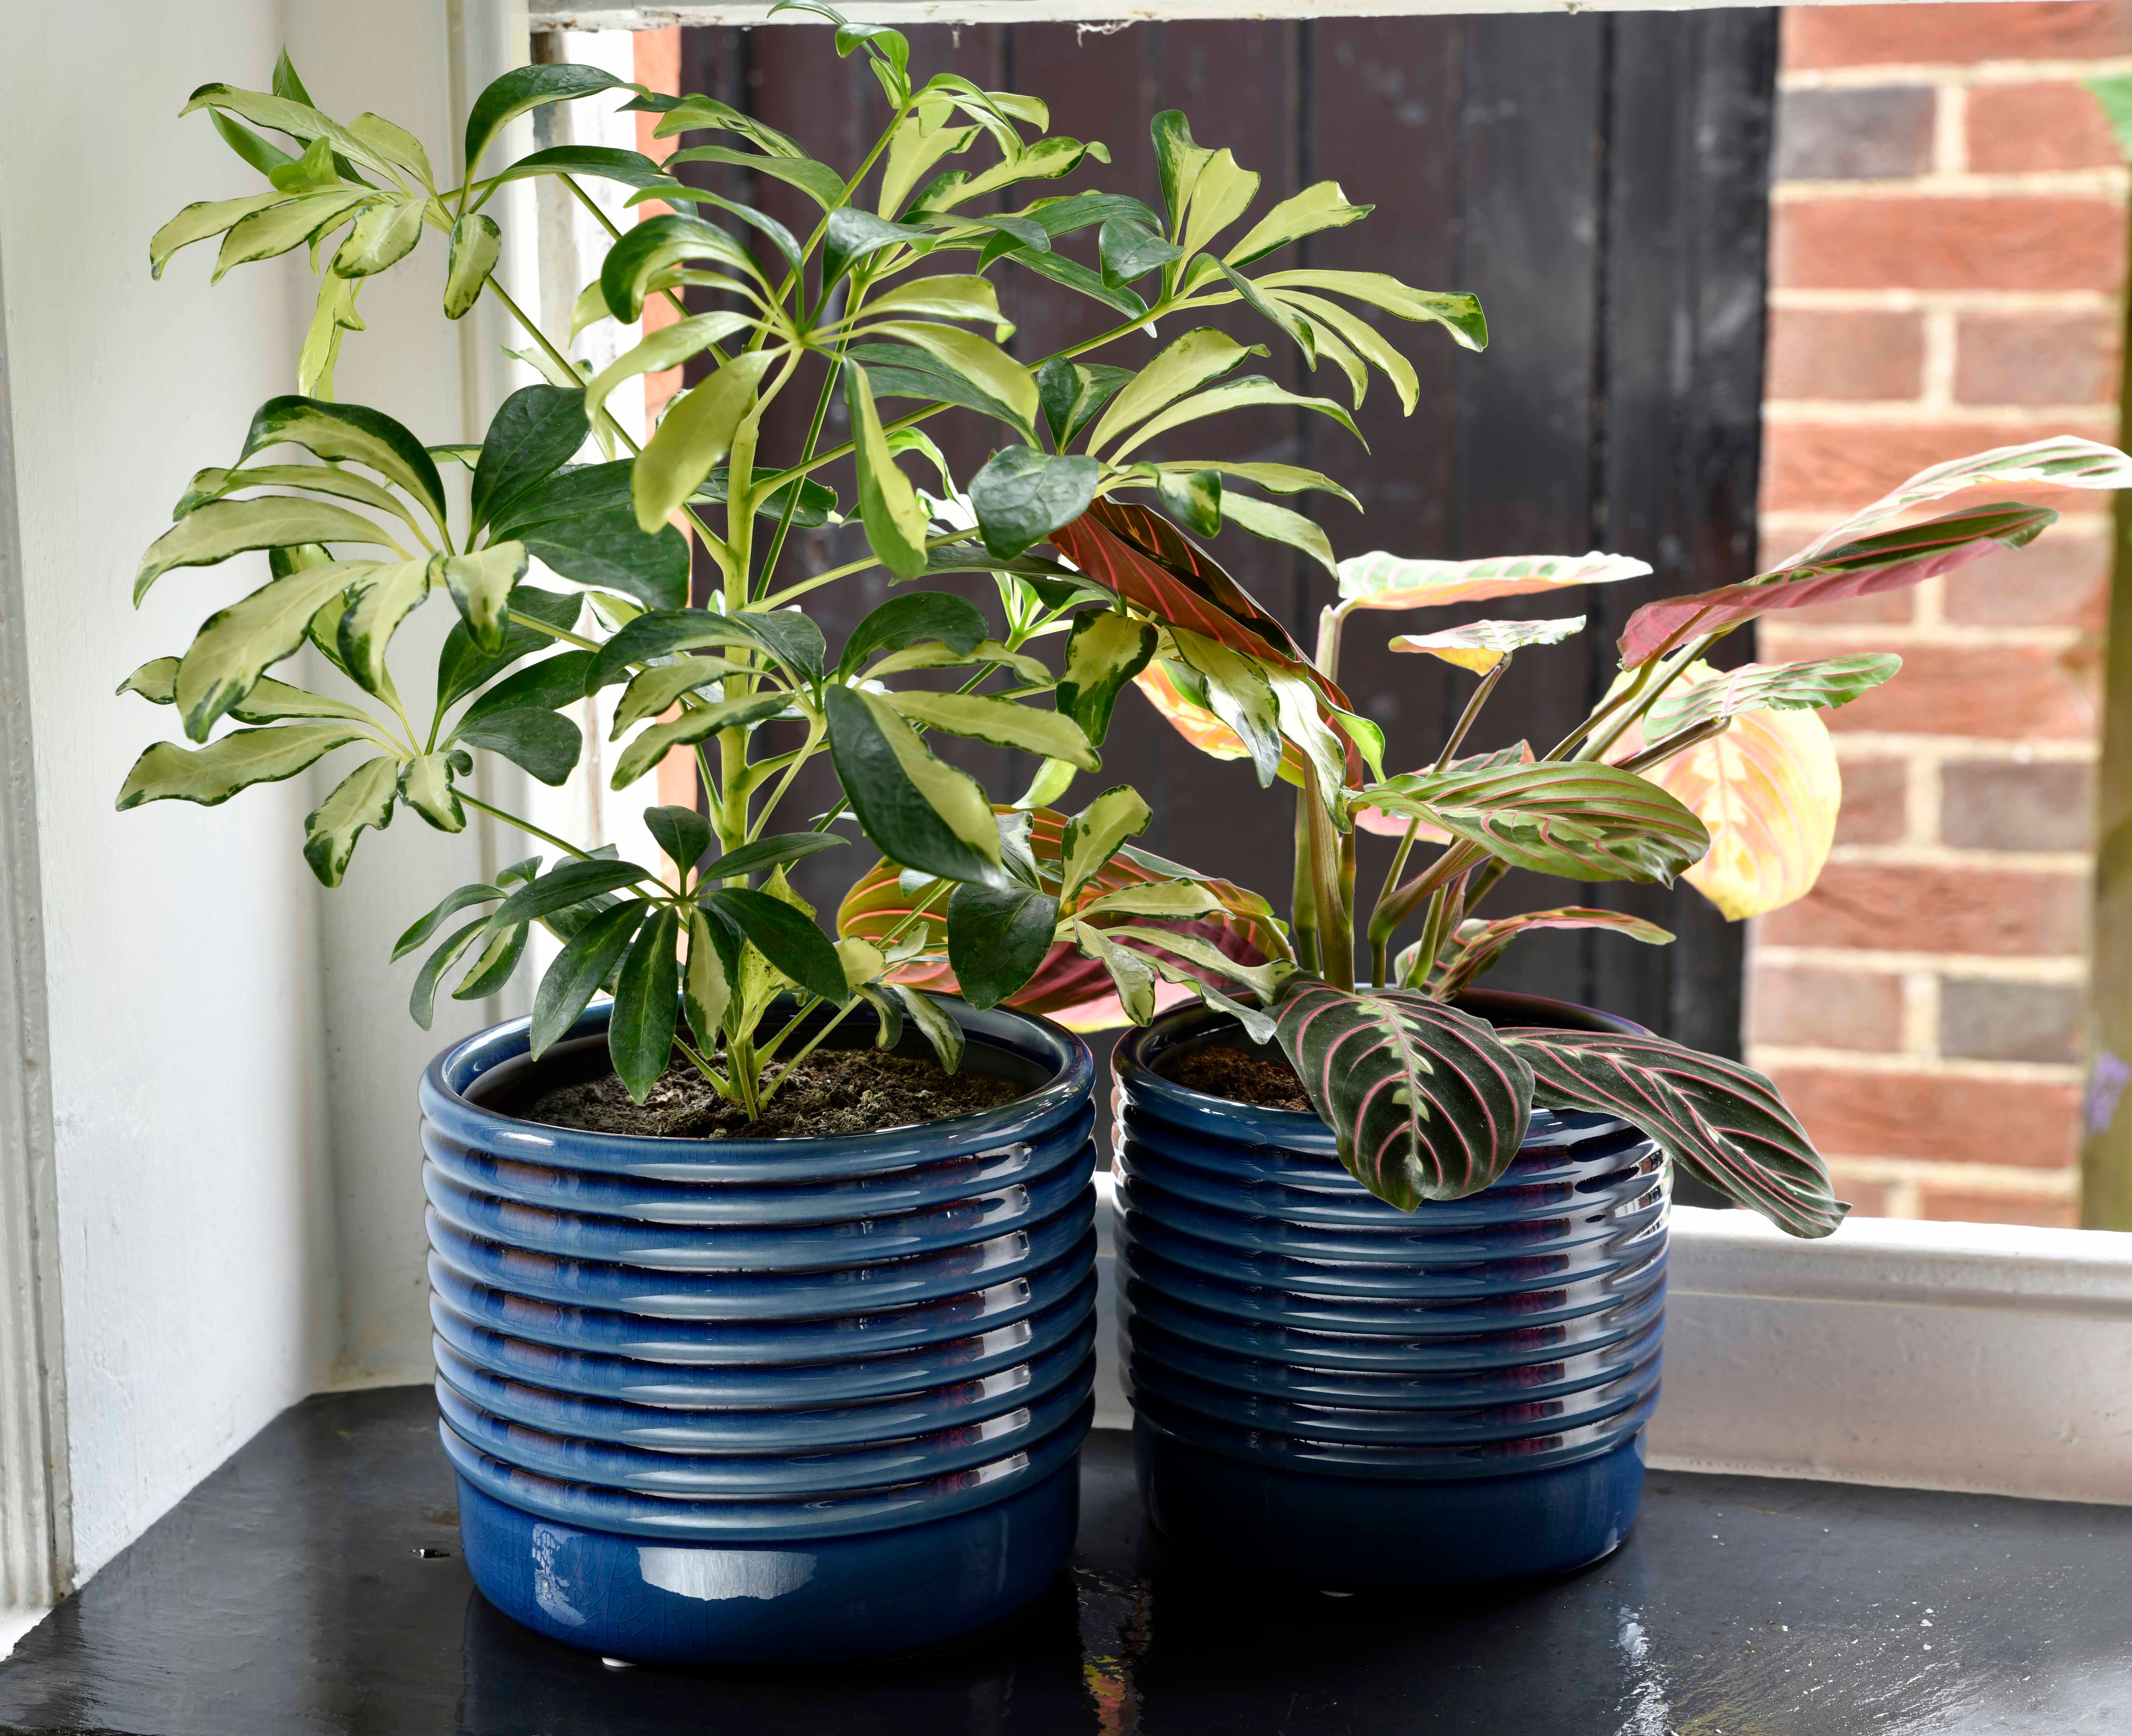 New indoor plant pots and mini vases by Burgon & Ball